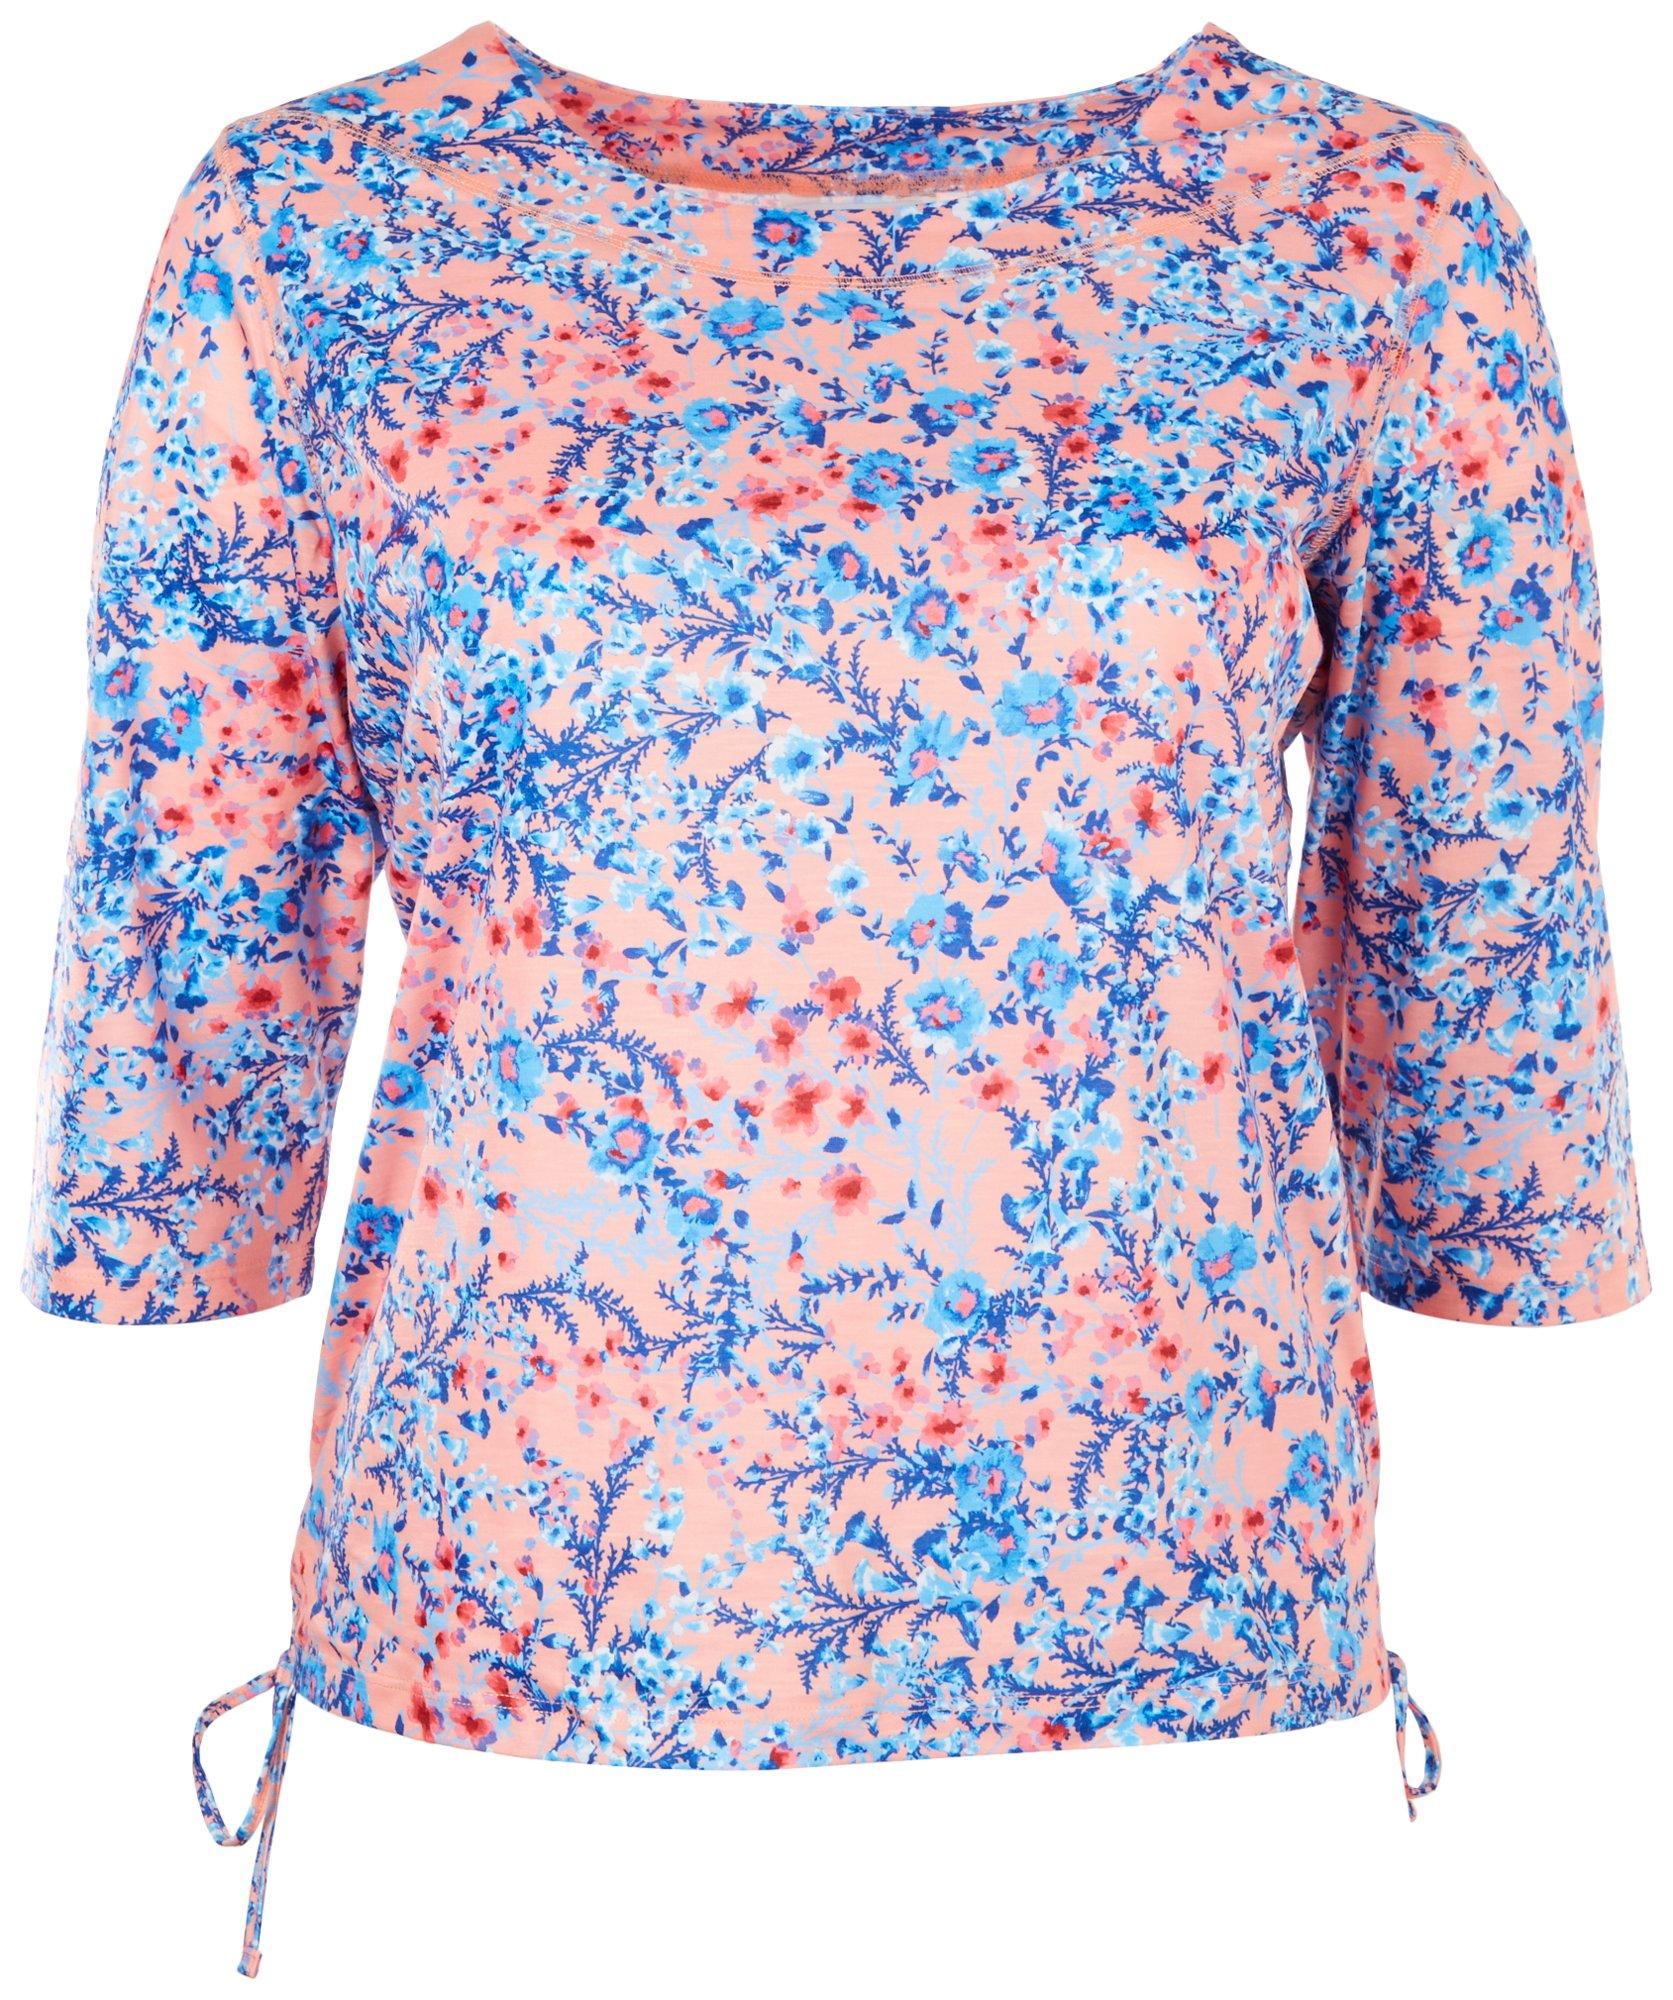 Coral Bay Plus Floral Side Ruched 3/4 Sleeve